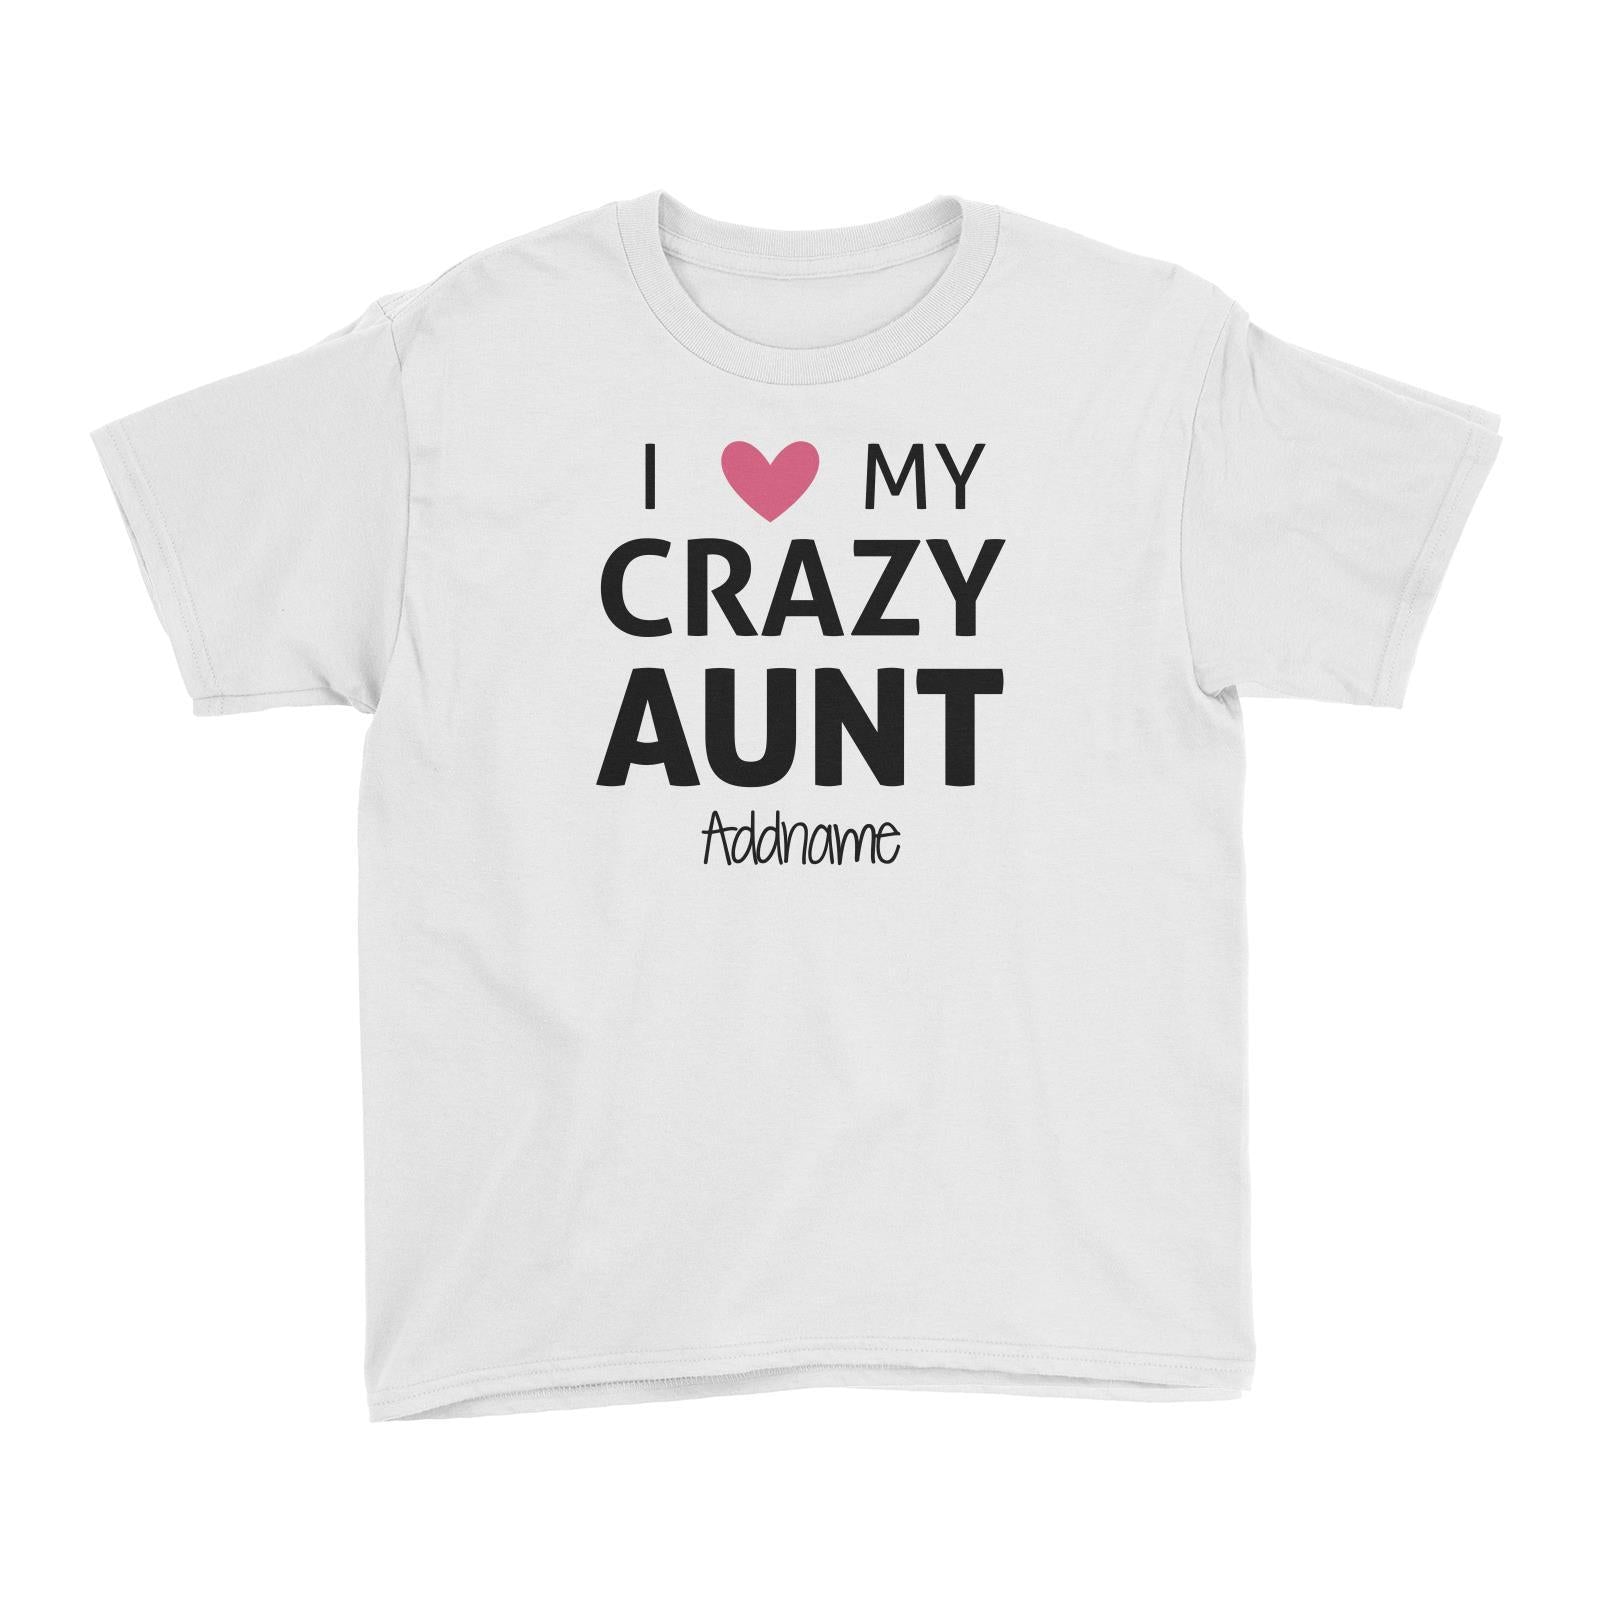 I Love My Crazy Aunt Addname Kid's T-Shirt